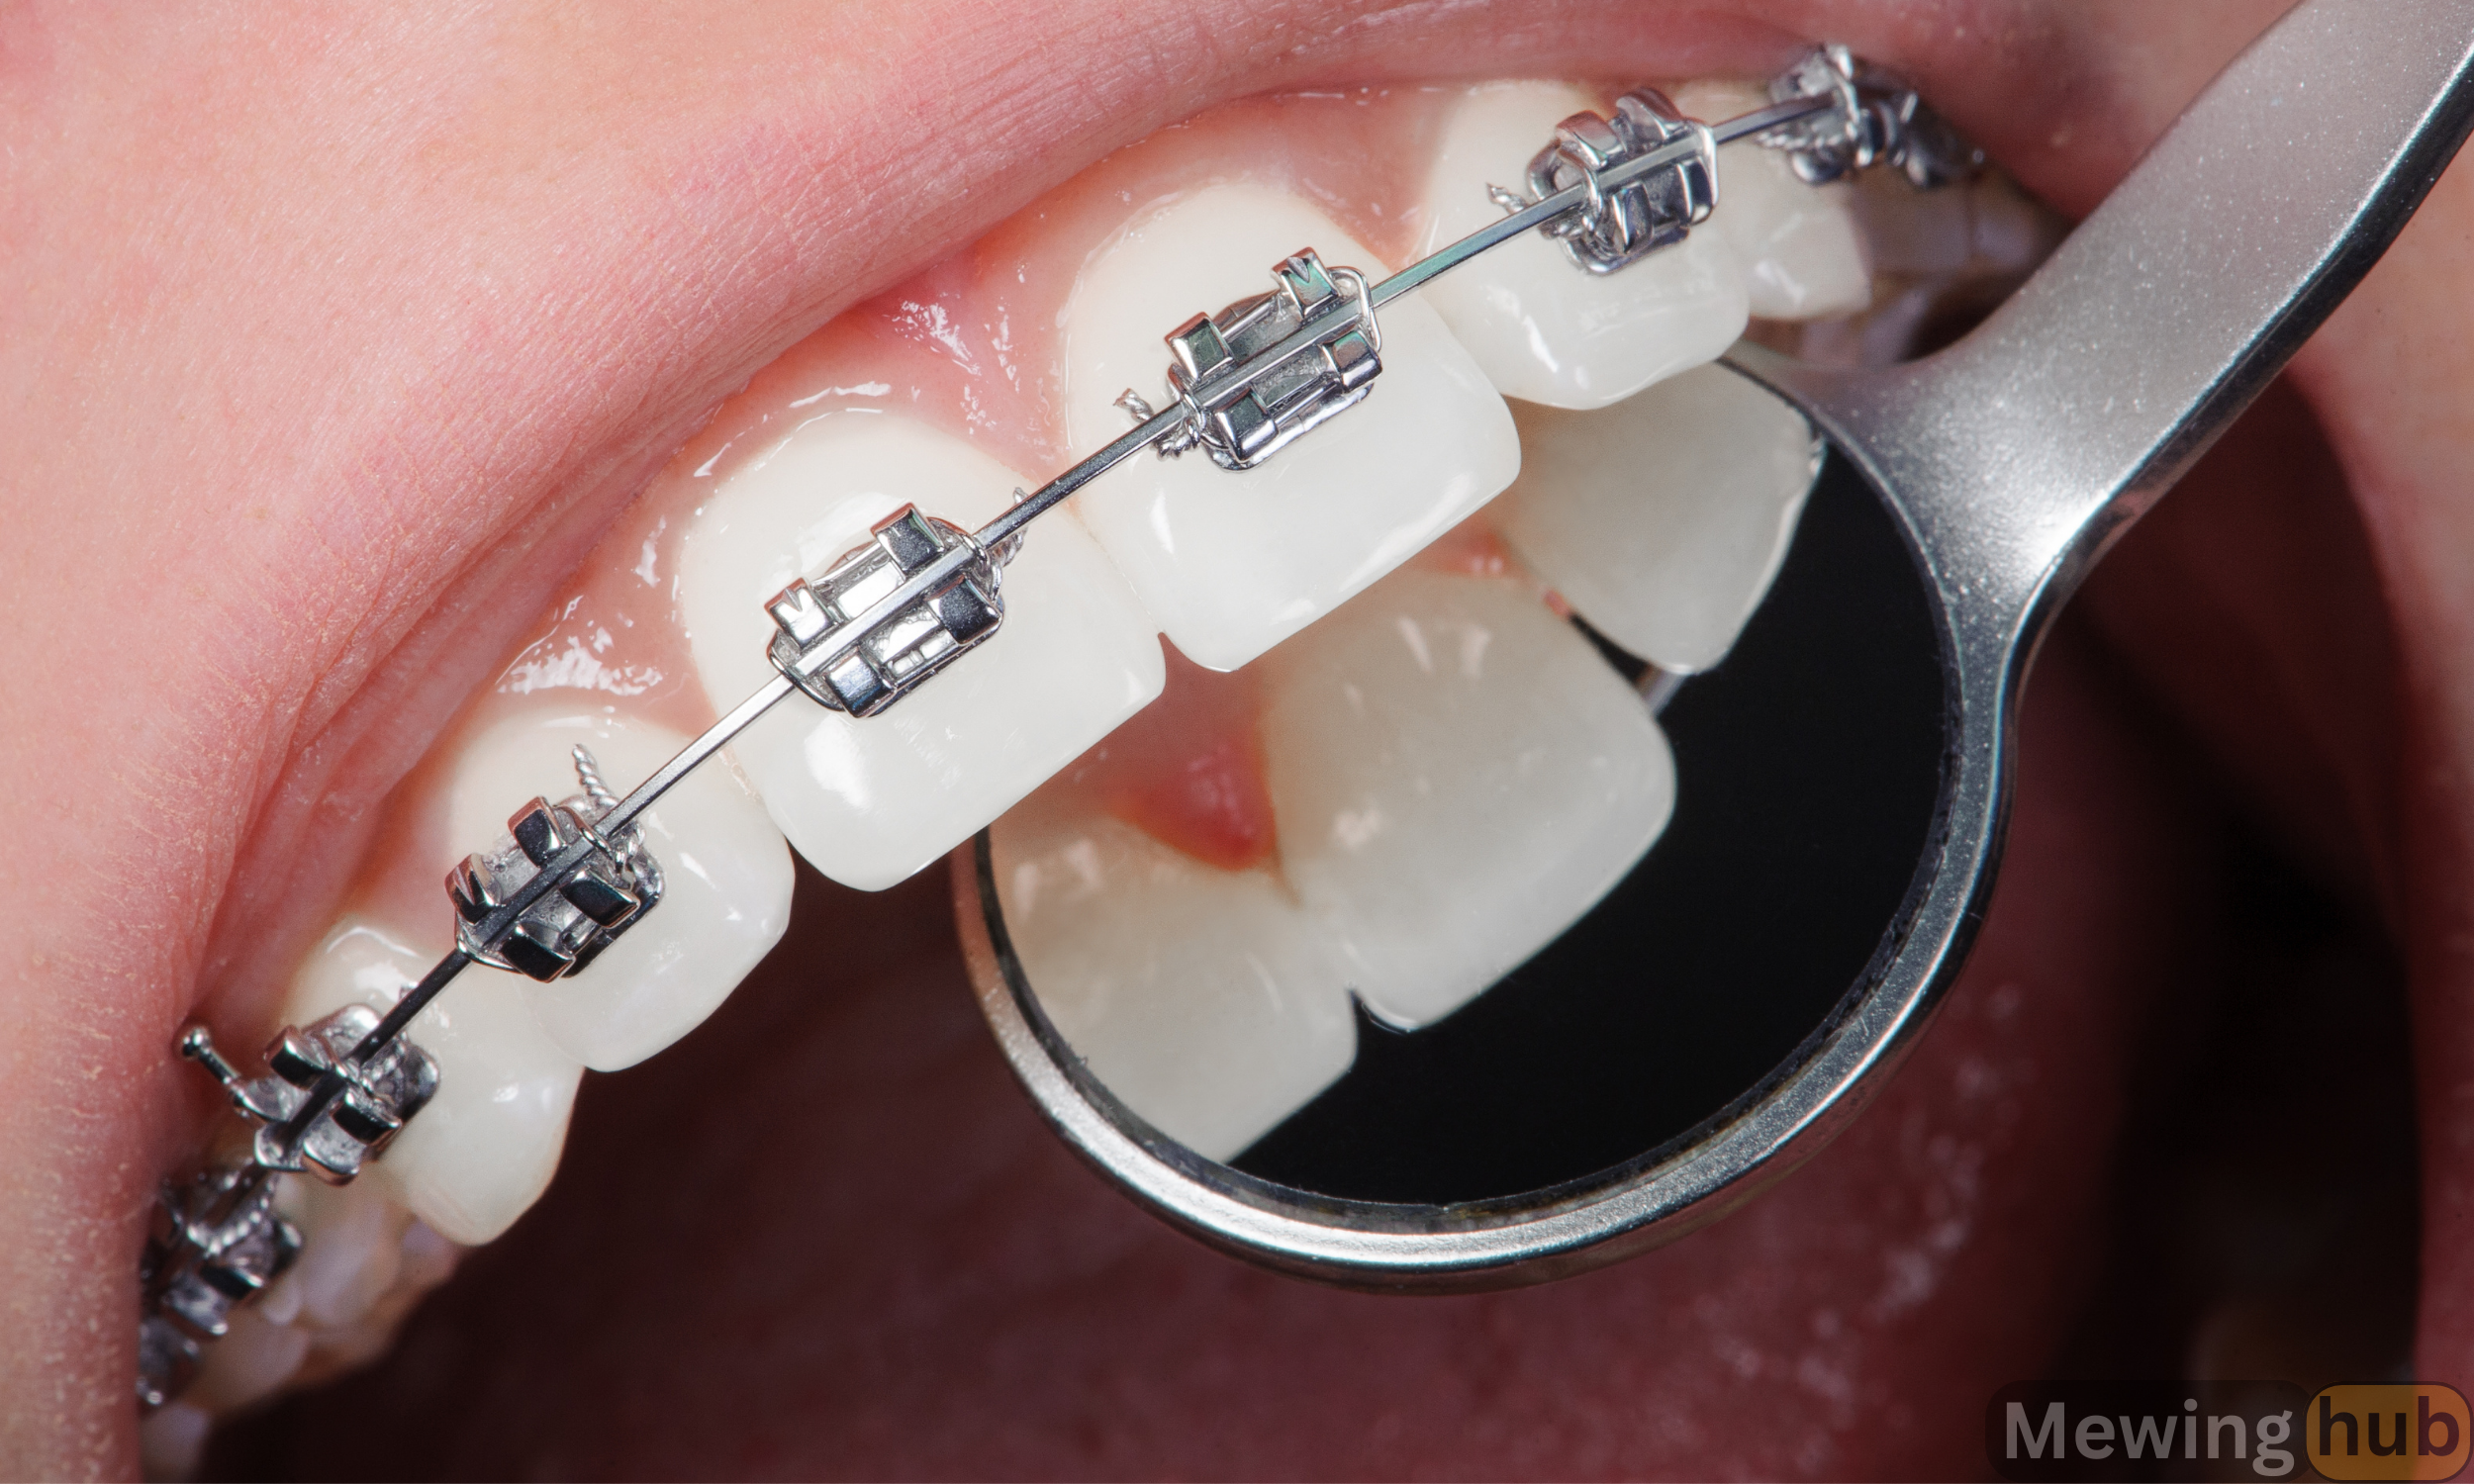 Close-up image showing dental braces on teeth with a dental mirror reflecting the braces.